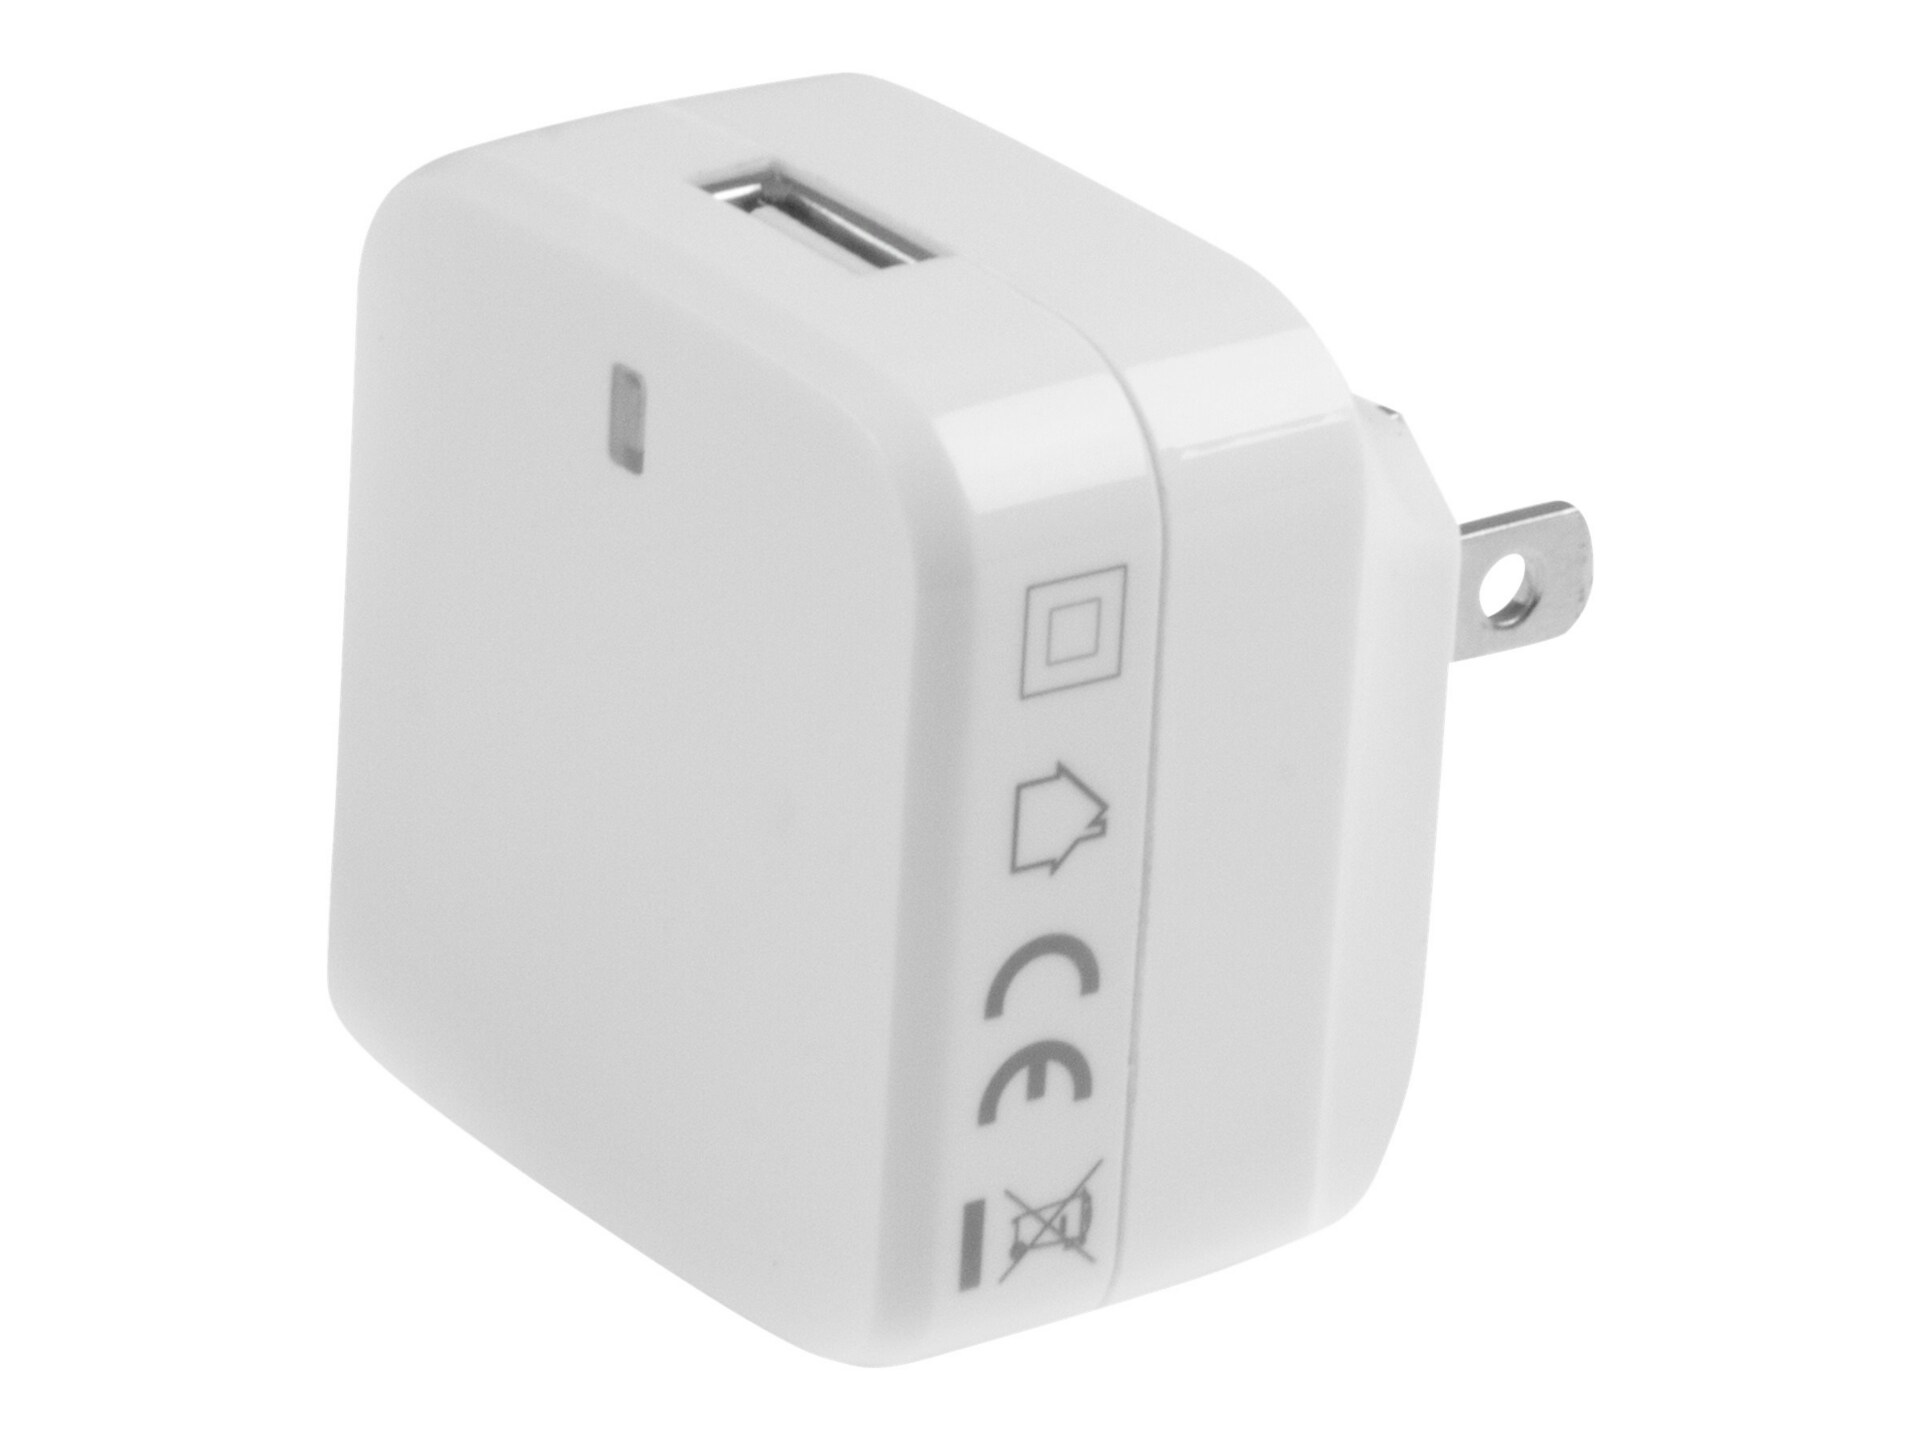 StarTech.com White USB Wall Charger - Quick Charge 2.0 - 110V/220V Charger